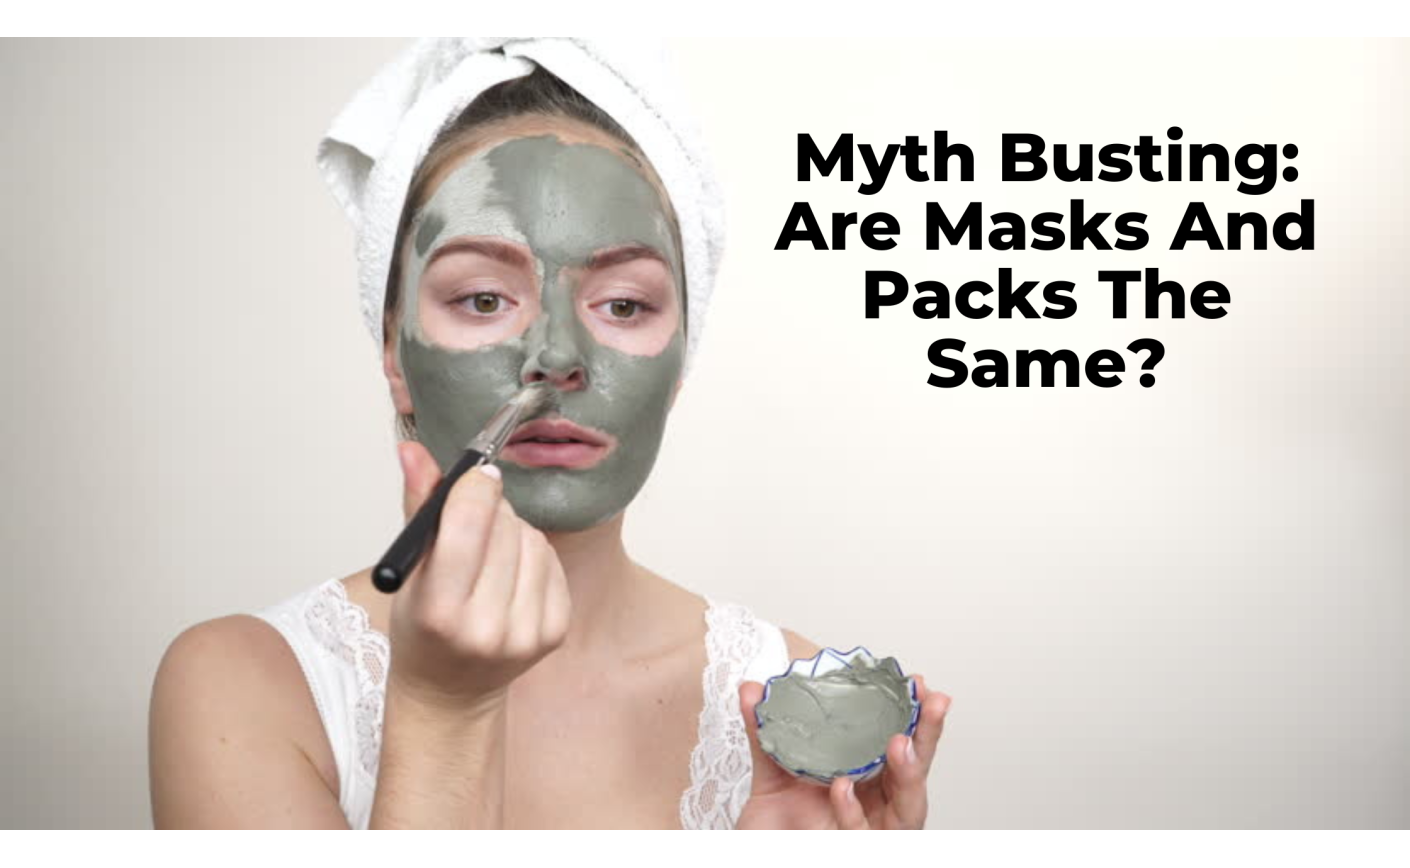 Myth Busting: Are Masks And Packs The Same?